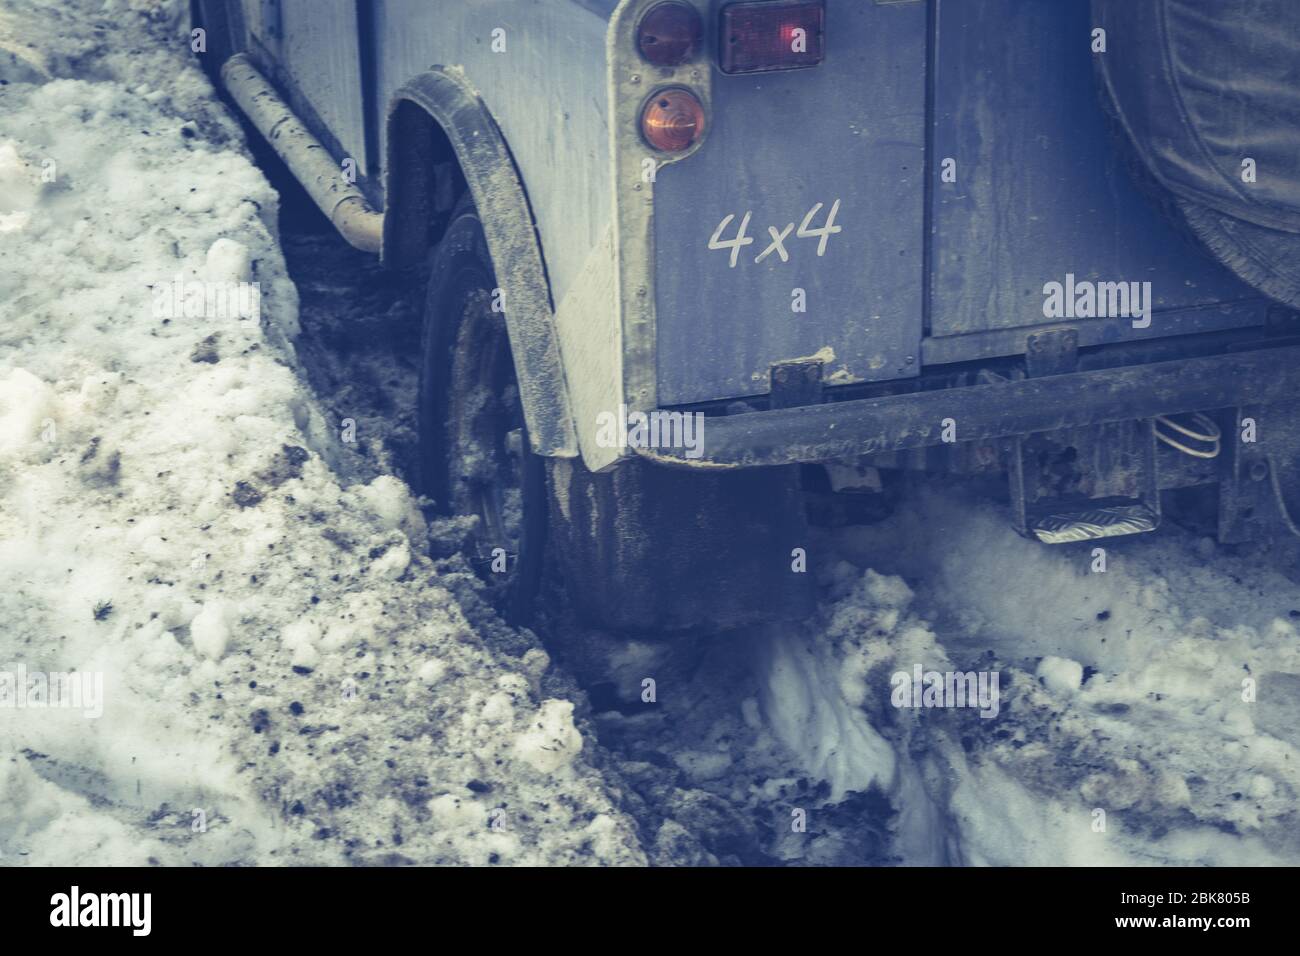 SUV Driving Along a Forest Road and Stuck in Pile of Mud and Snow. Blue Jeep Sticks in Deep Snow Slips. Stock Photo